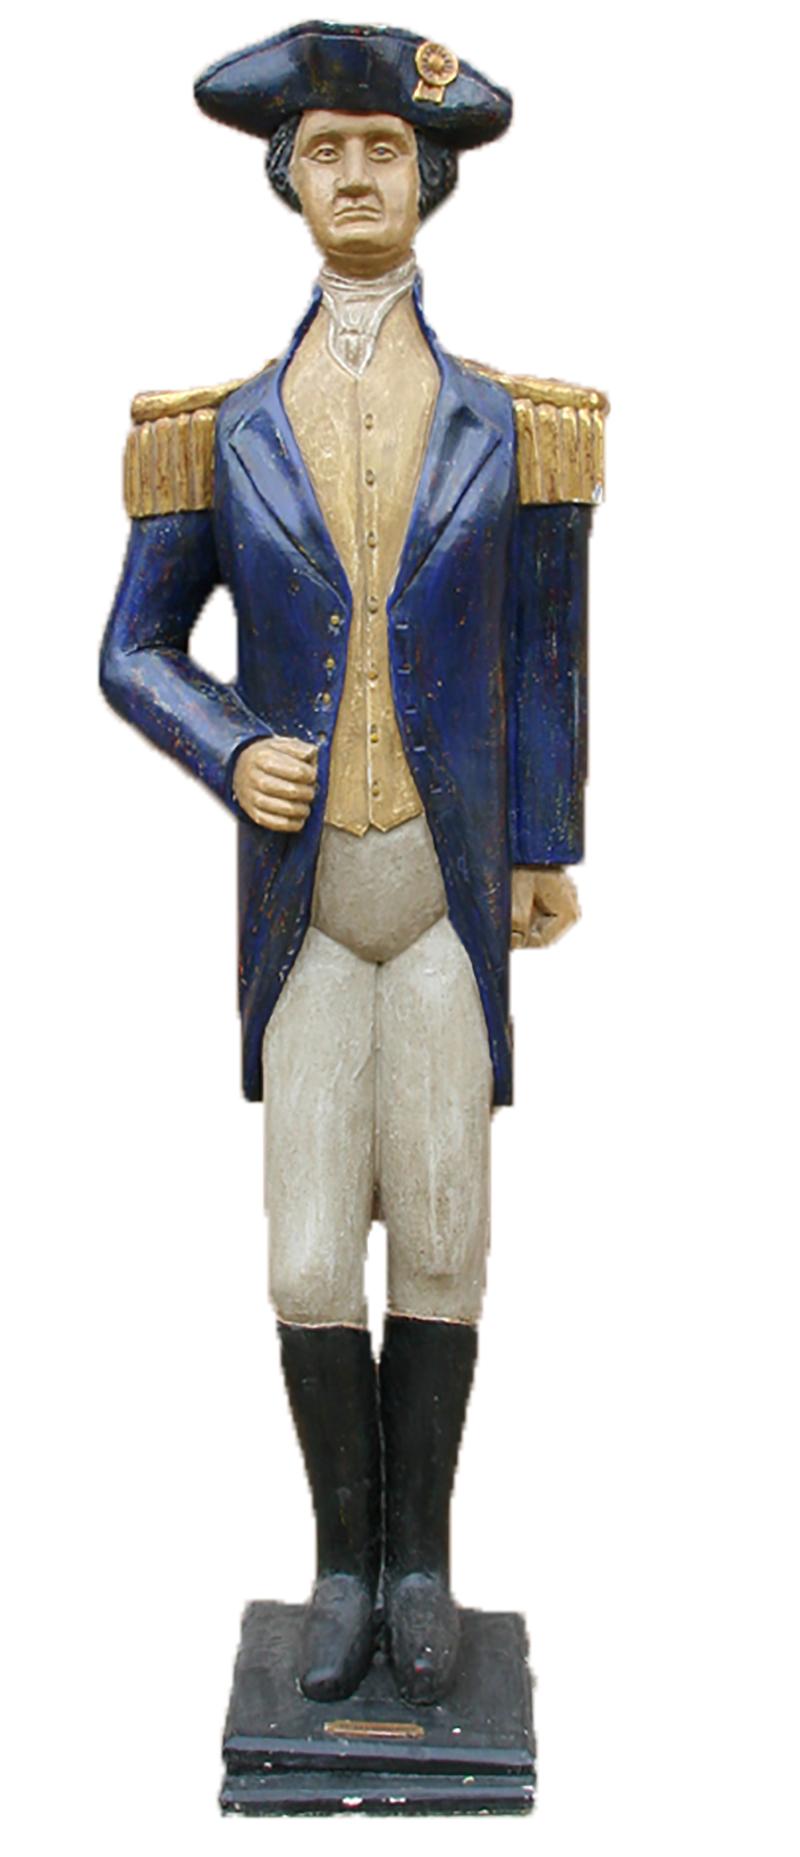 M. Brodin Figurative Sculpture - George Washington, Unique Carved and Painted Wooden Sculpture